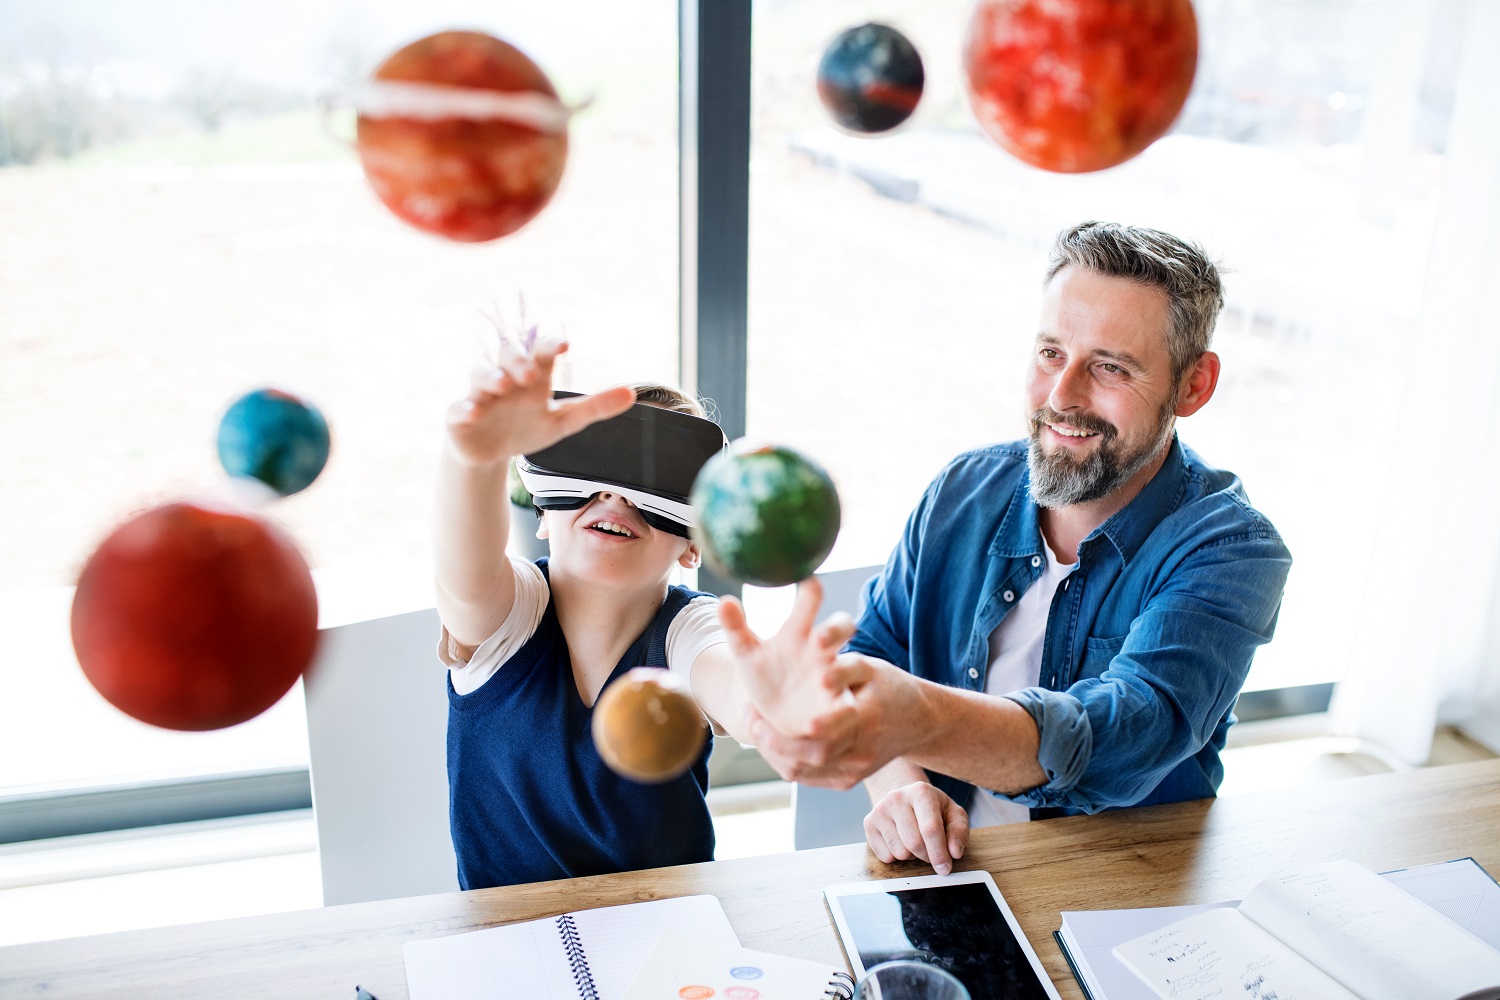 , From Cloud Computing to VR – Education is Taking Exciting Steps Forward in Tech!